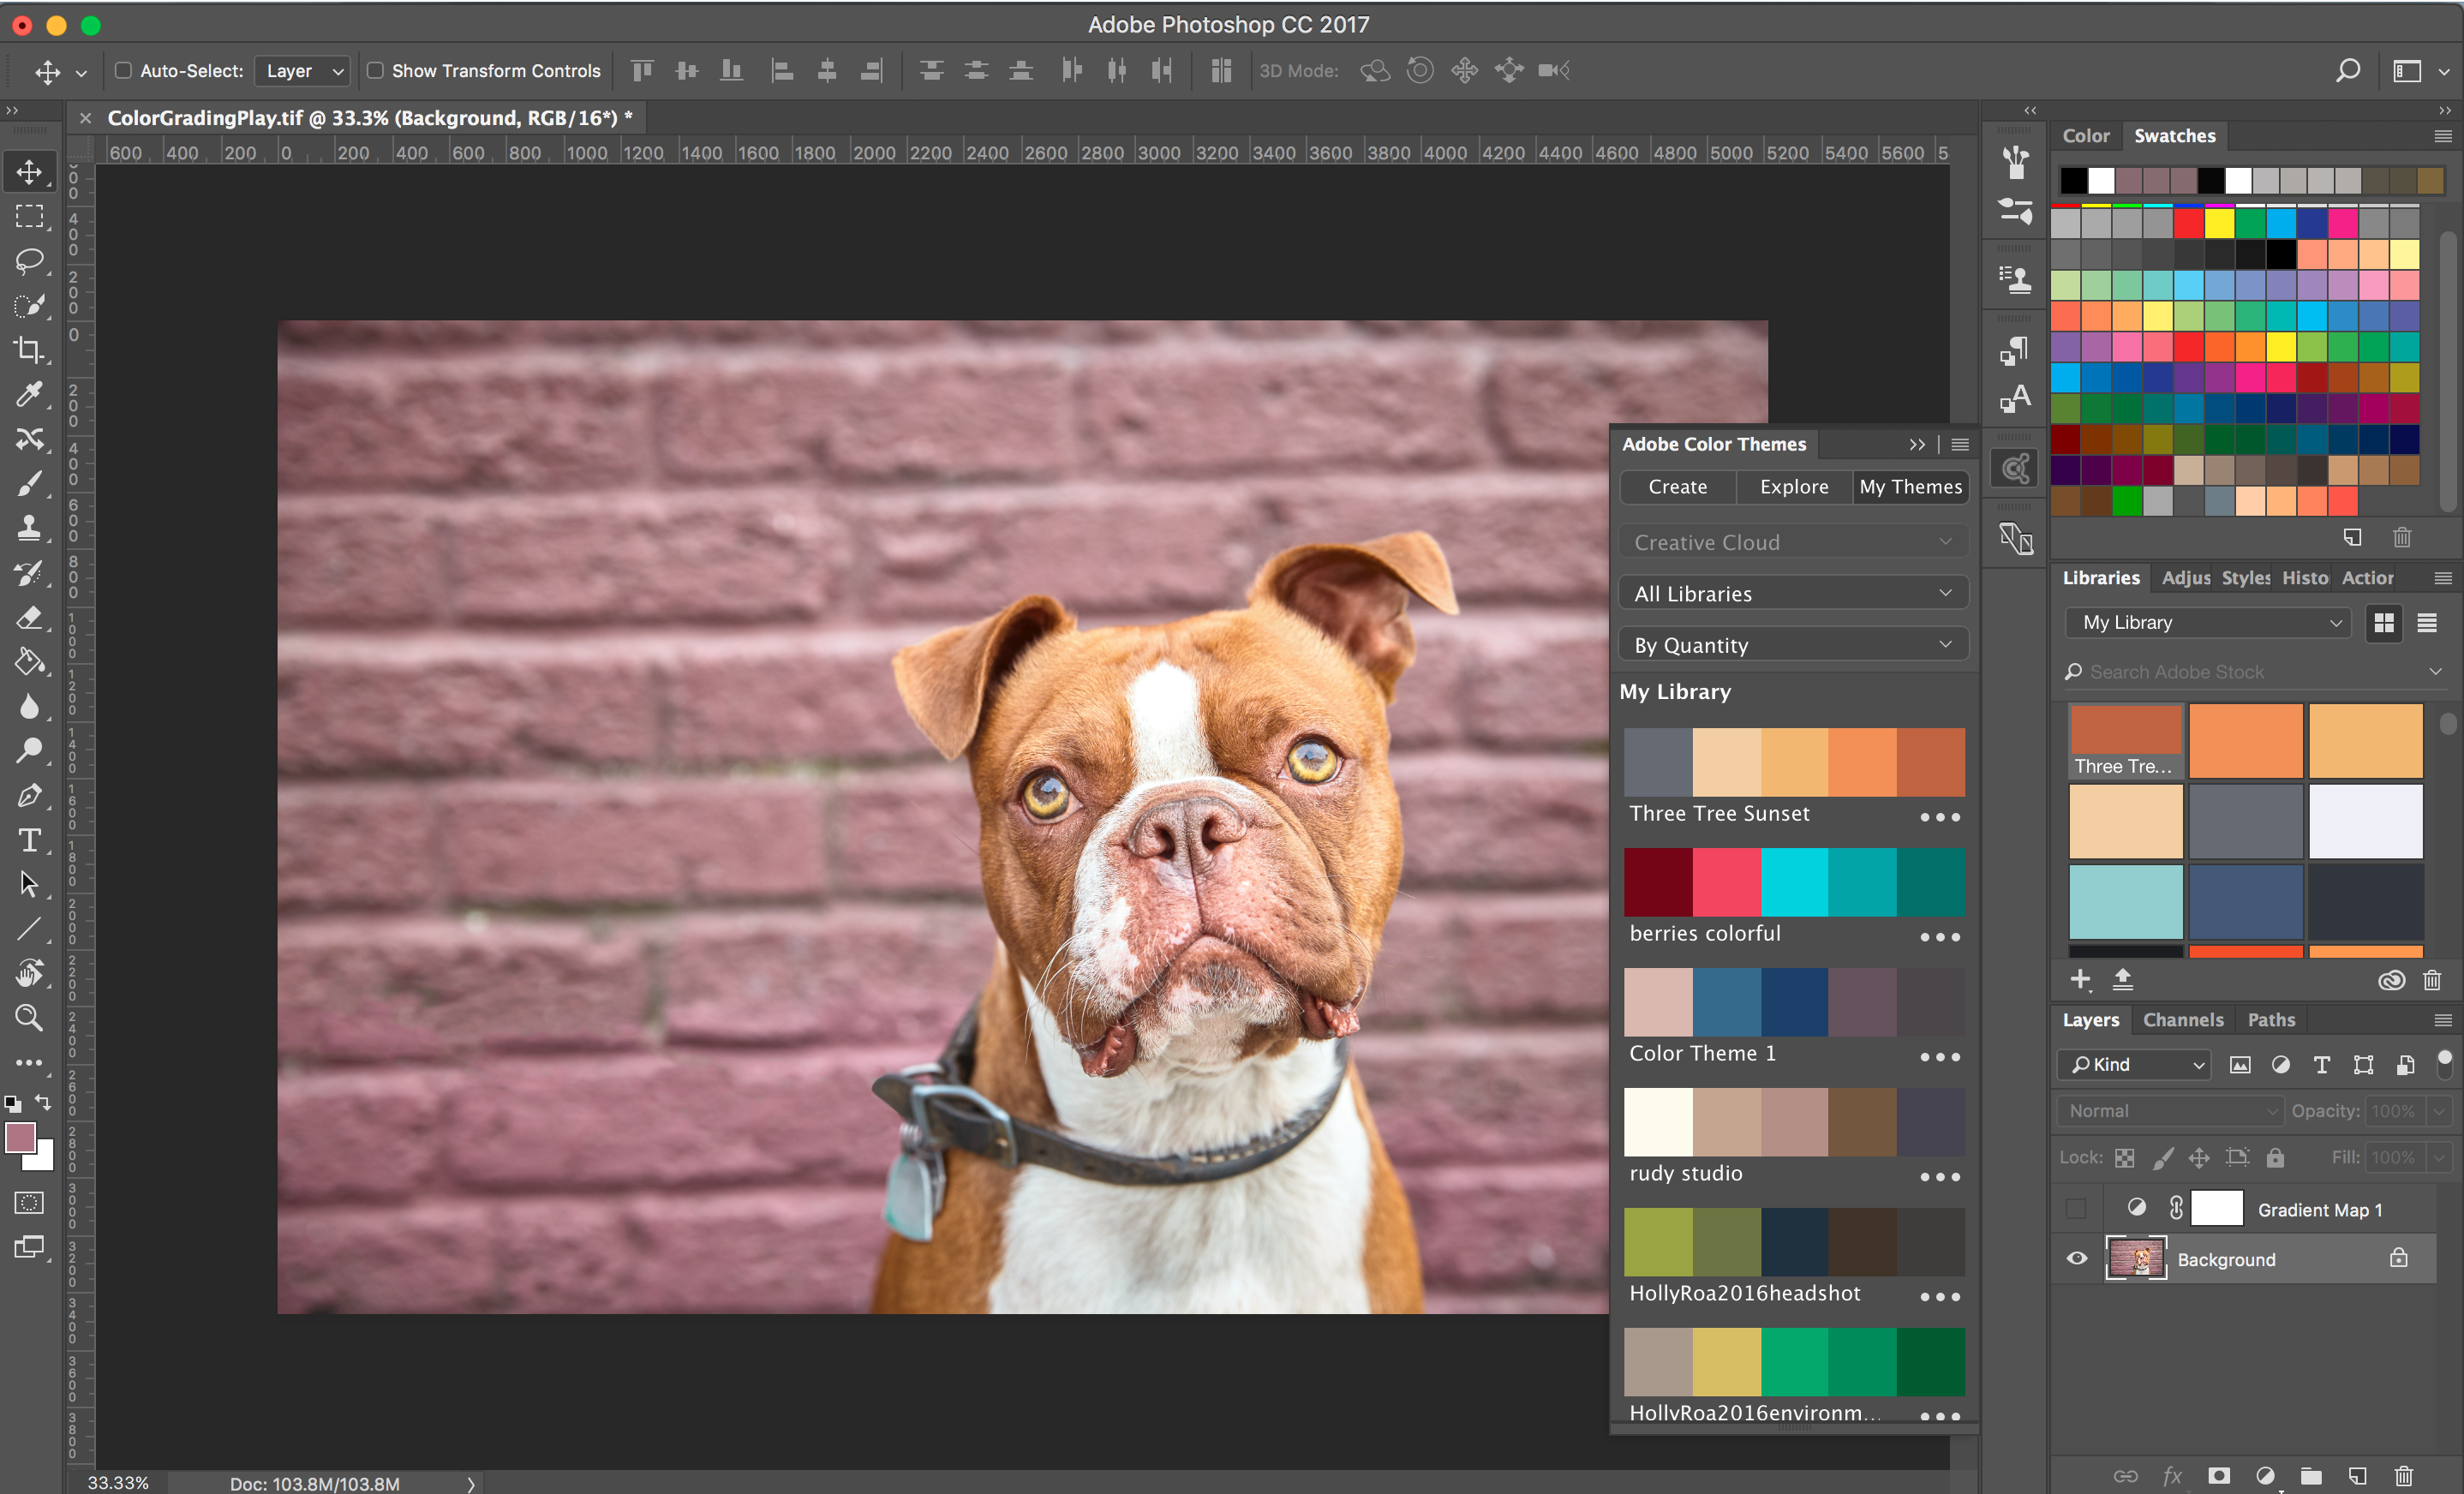 Adobe Color Themes How To Create Use Them For Color Grading In Photoshop